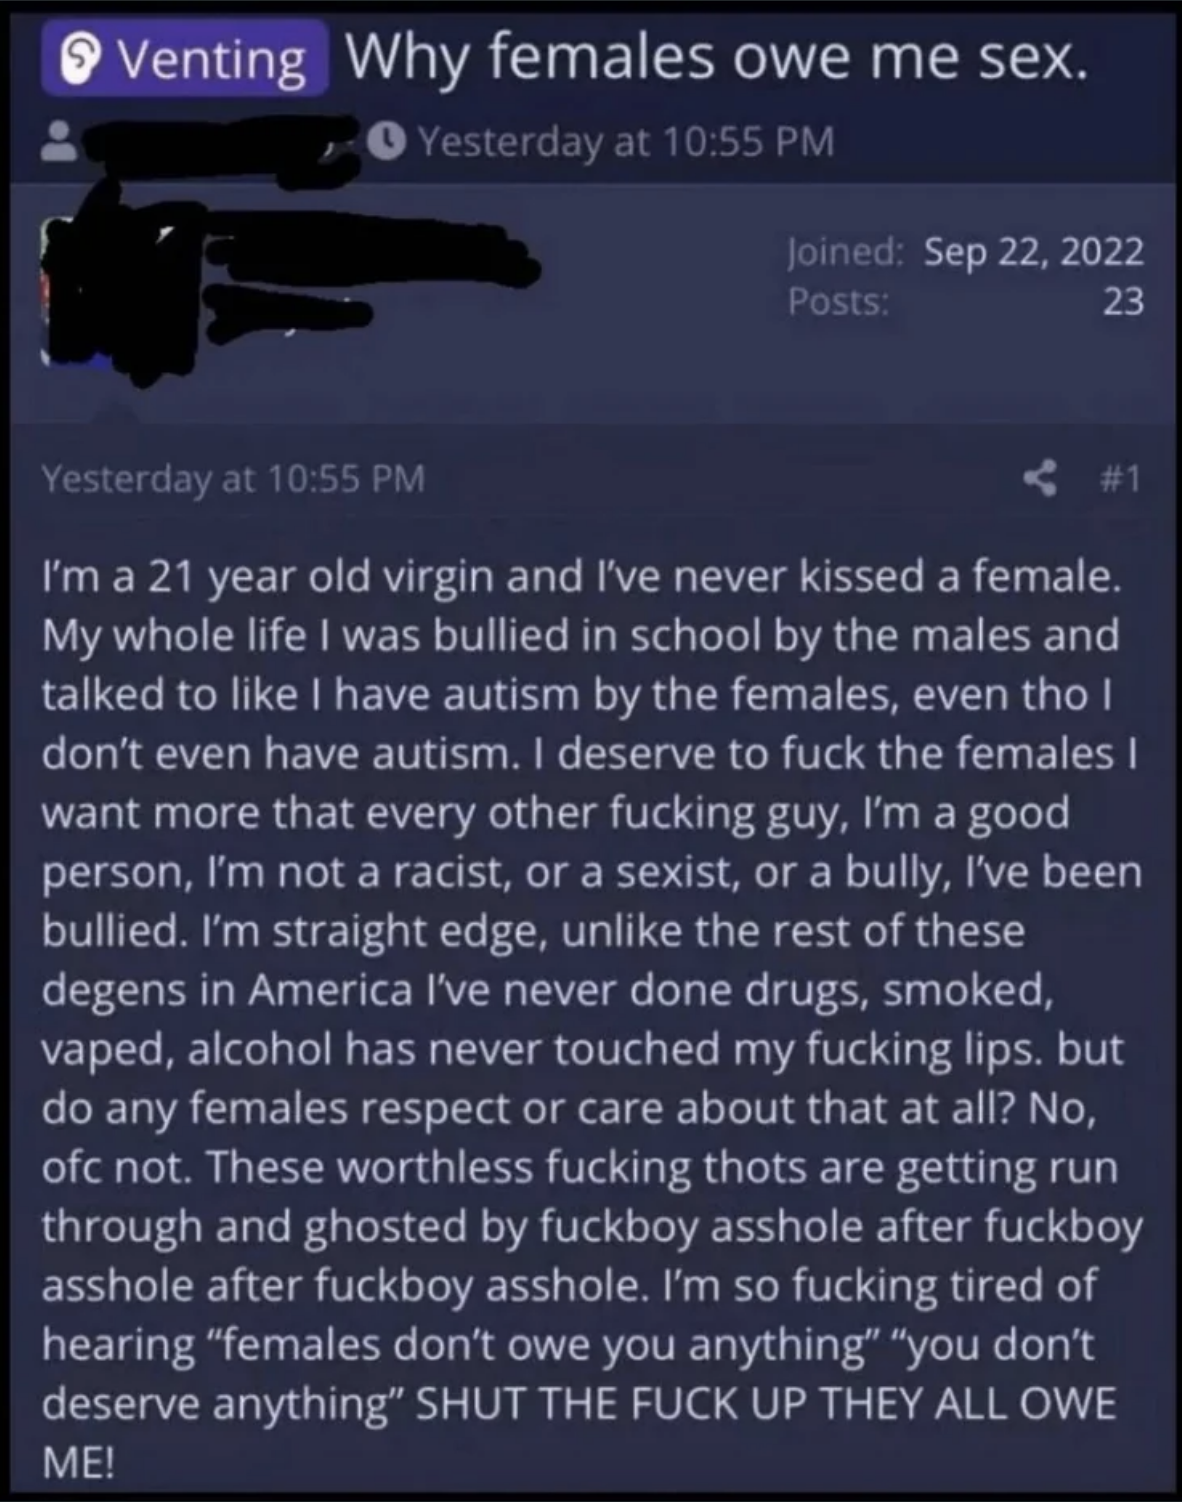 &quot;These worthless fucking thots are getting run through and ghosted by fuckboy asshole after fuckboy asshole&quot;